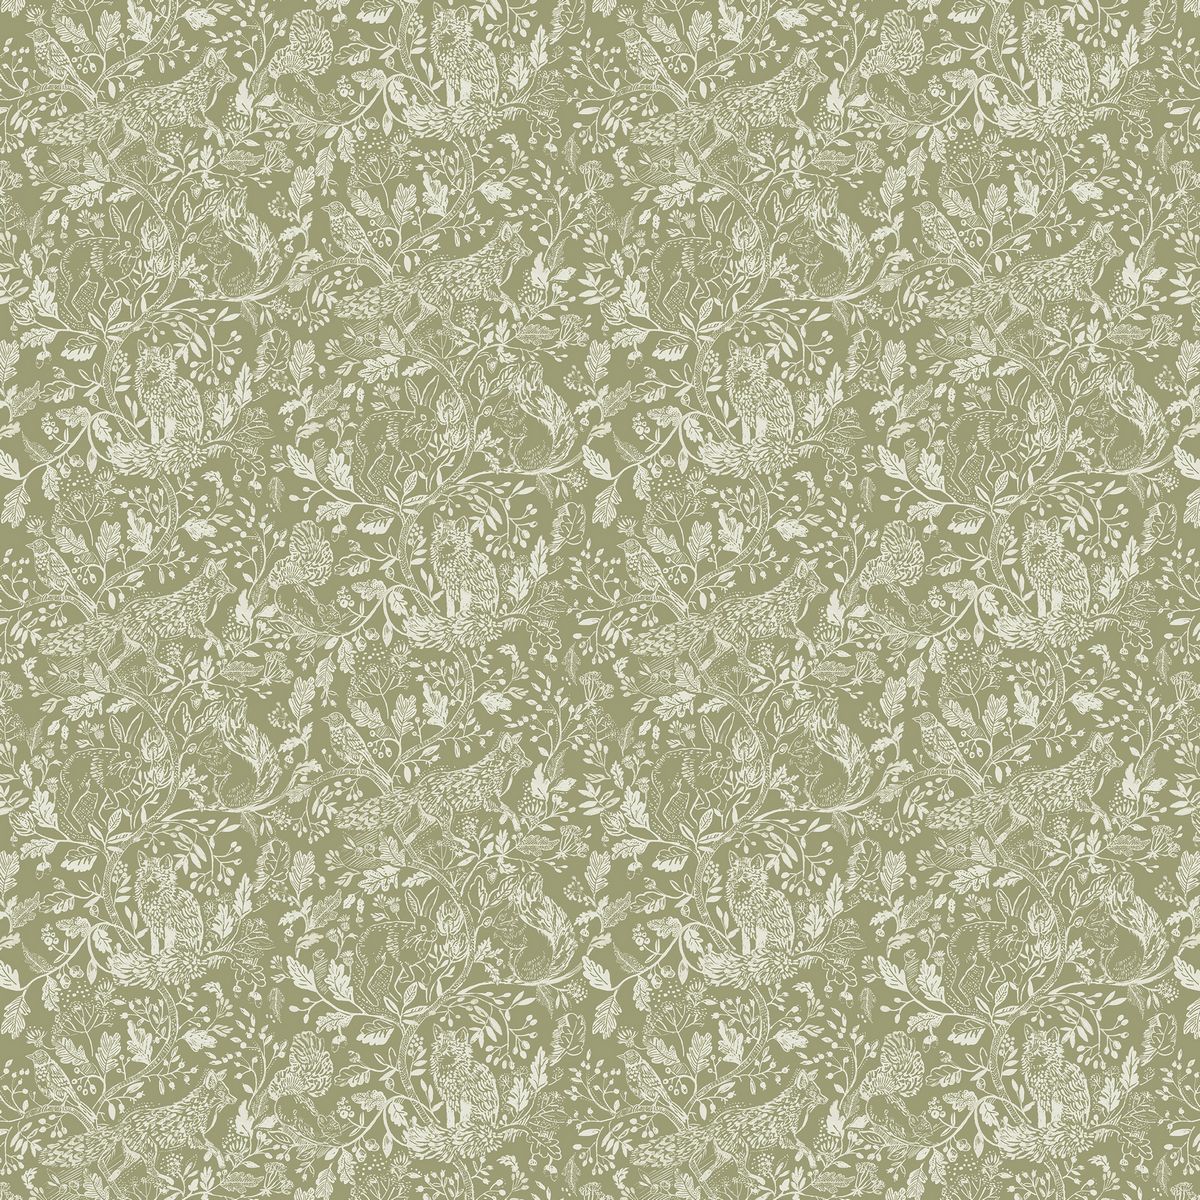 Cademuir Olive Fabric by Voyage Maison